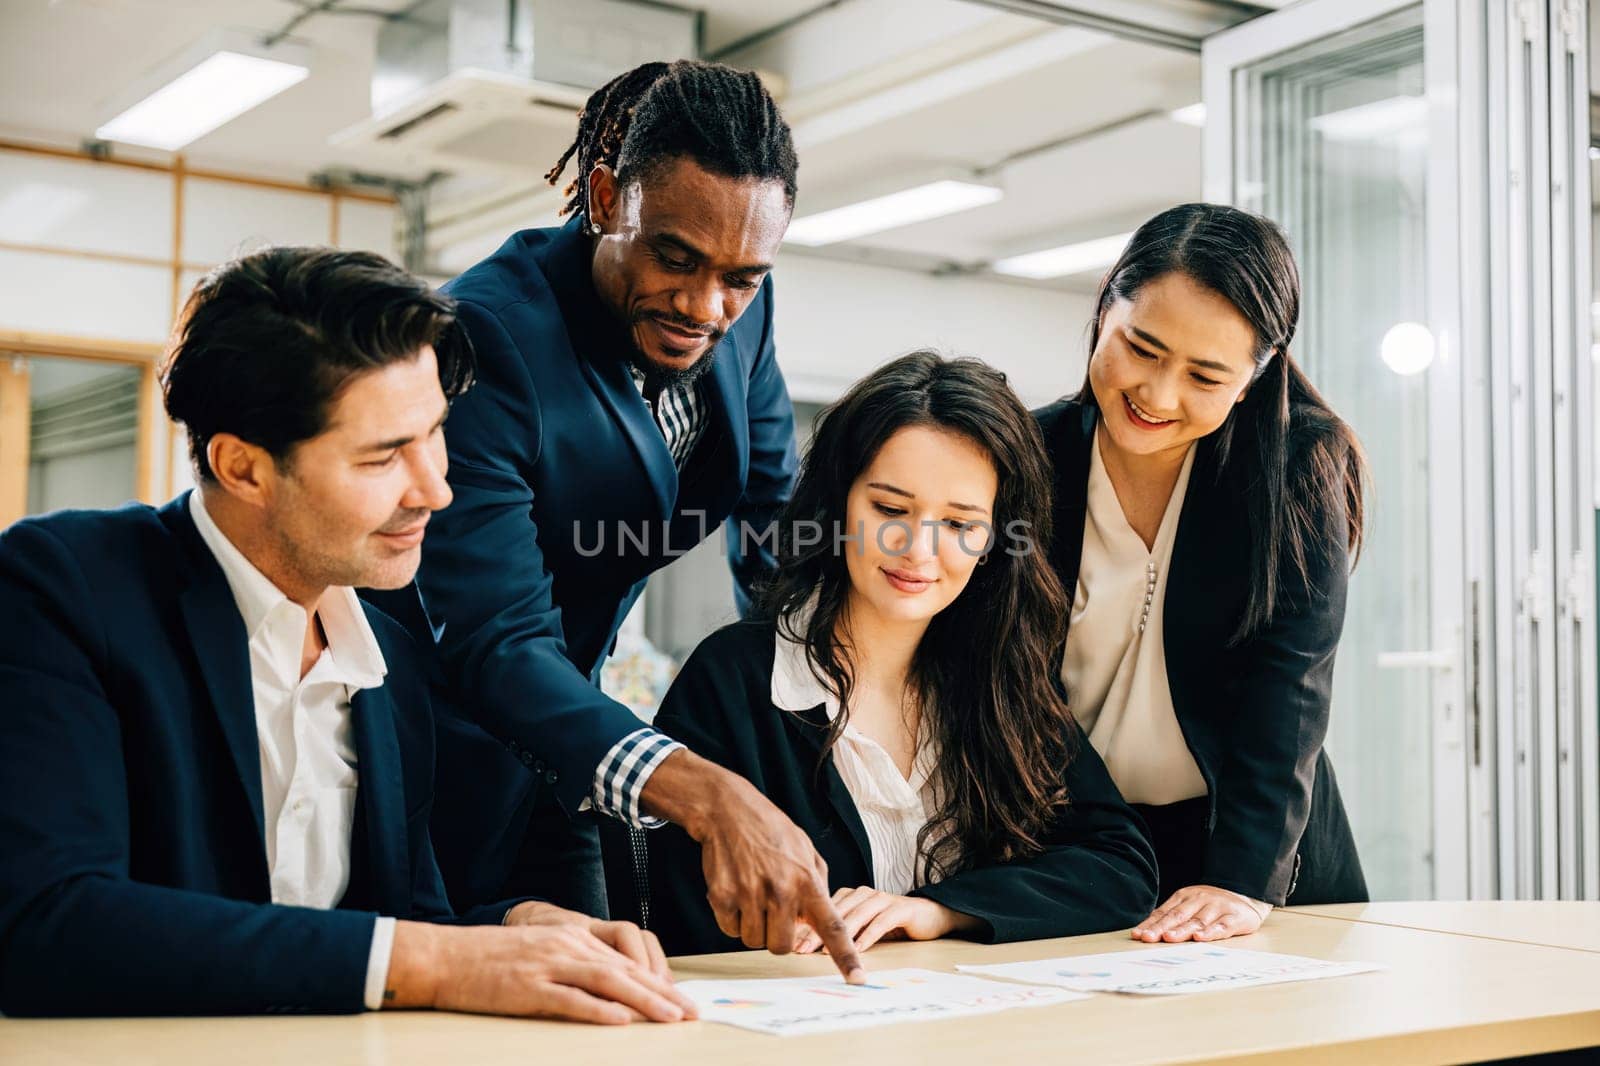 A global team, with a female leader, collaborates in a meeting room. Their teamwork is evident as they discuss financial results, share ideas, and brainstorm strategies for success. by Sorapop